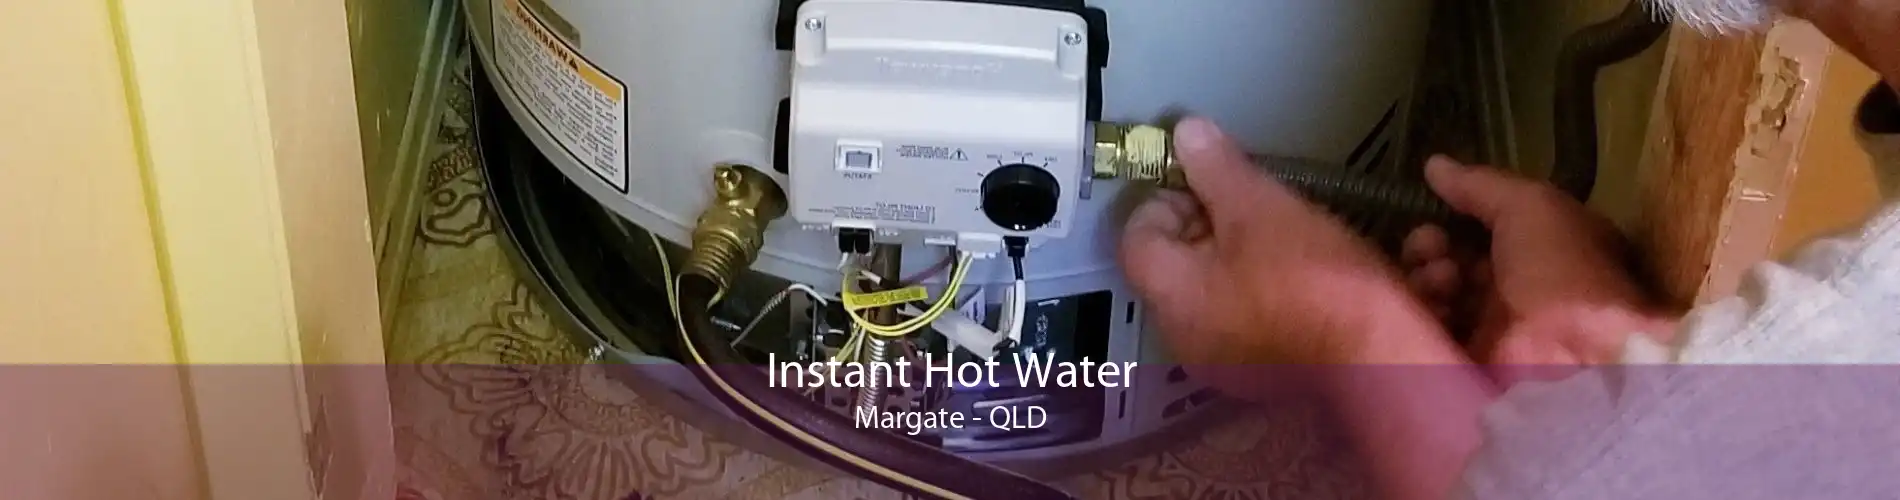 Instant Hot Water Margate - QLD